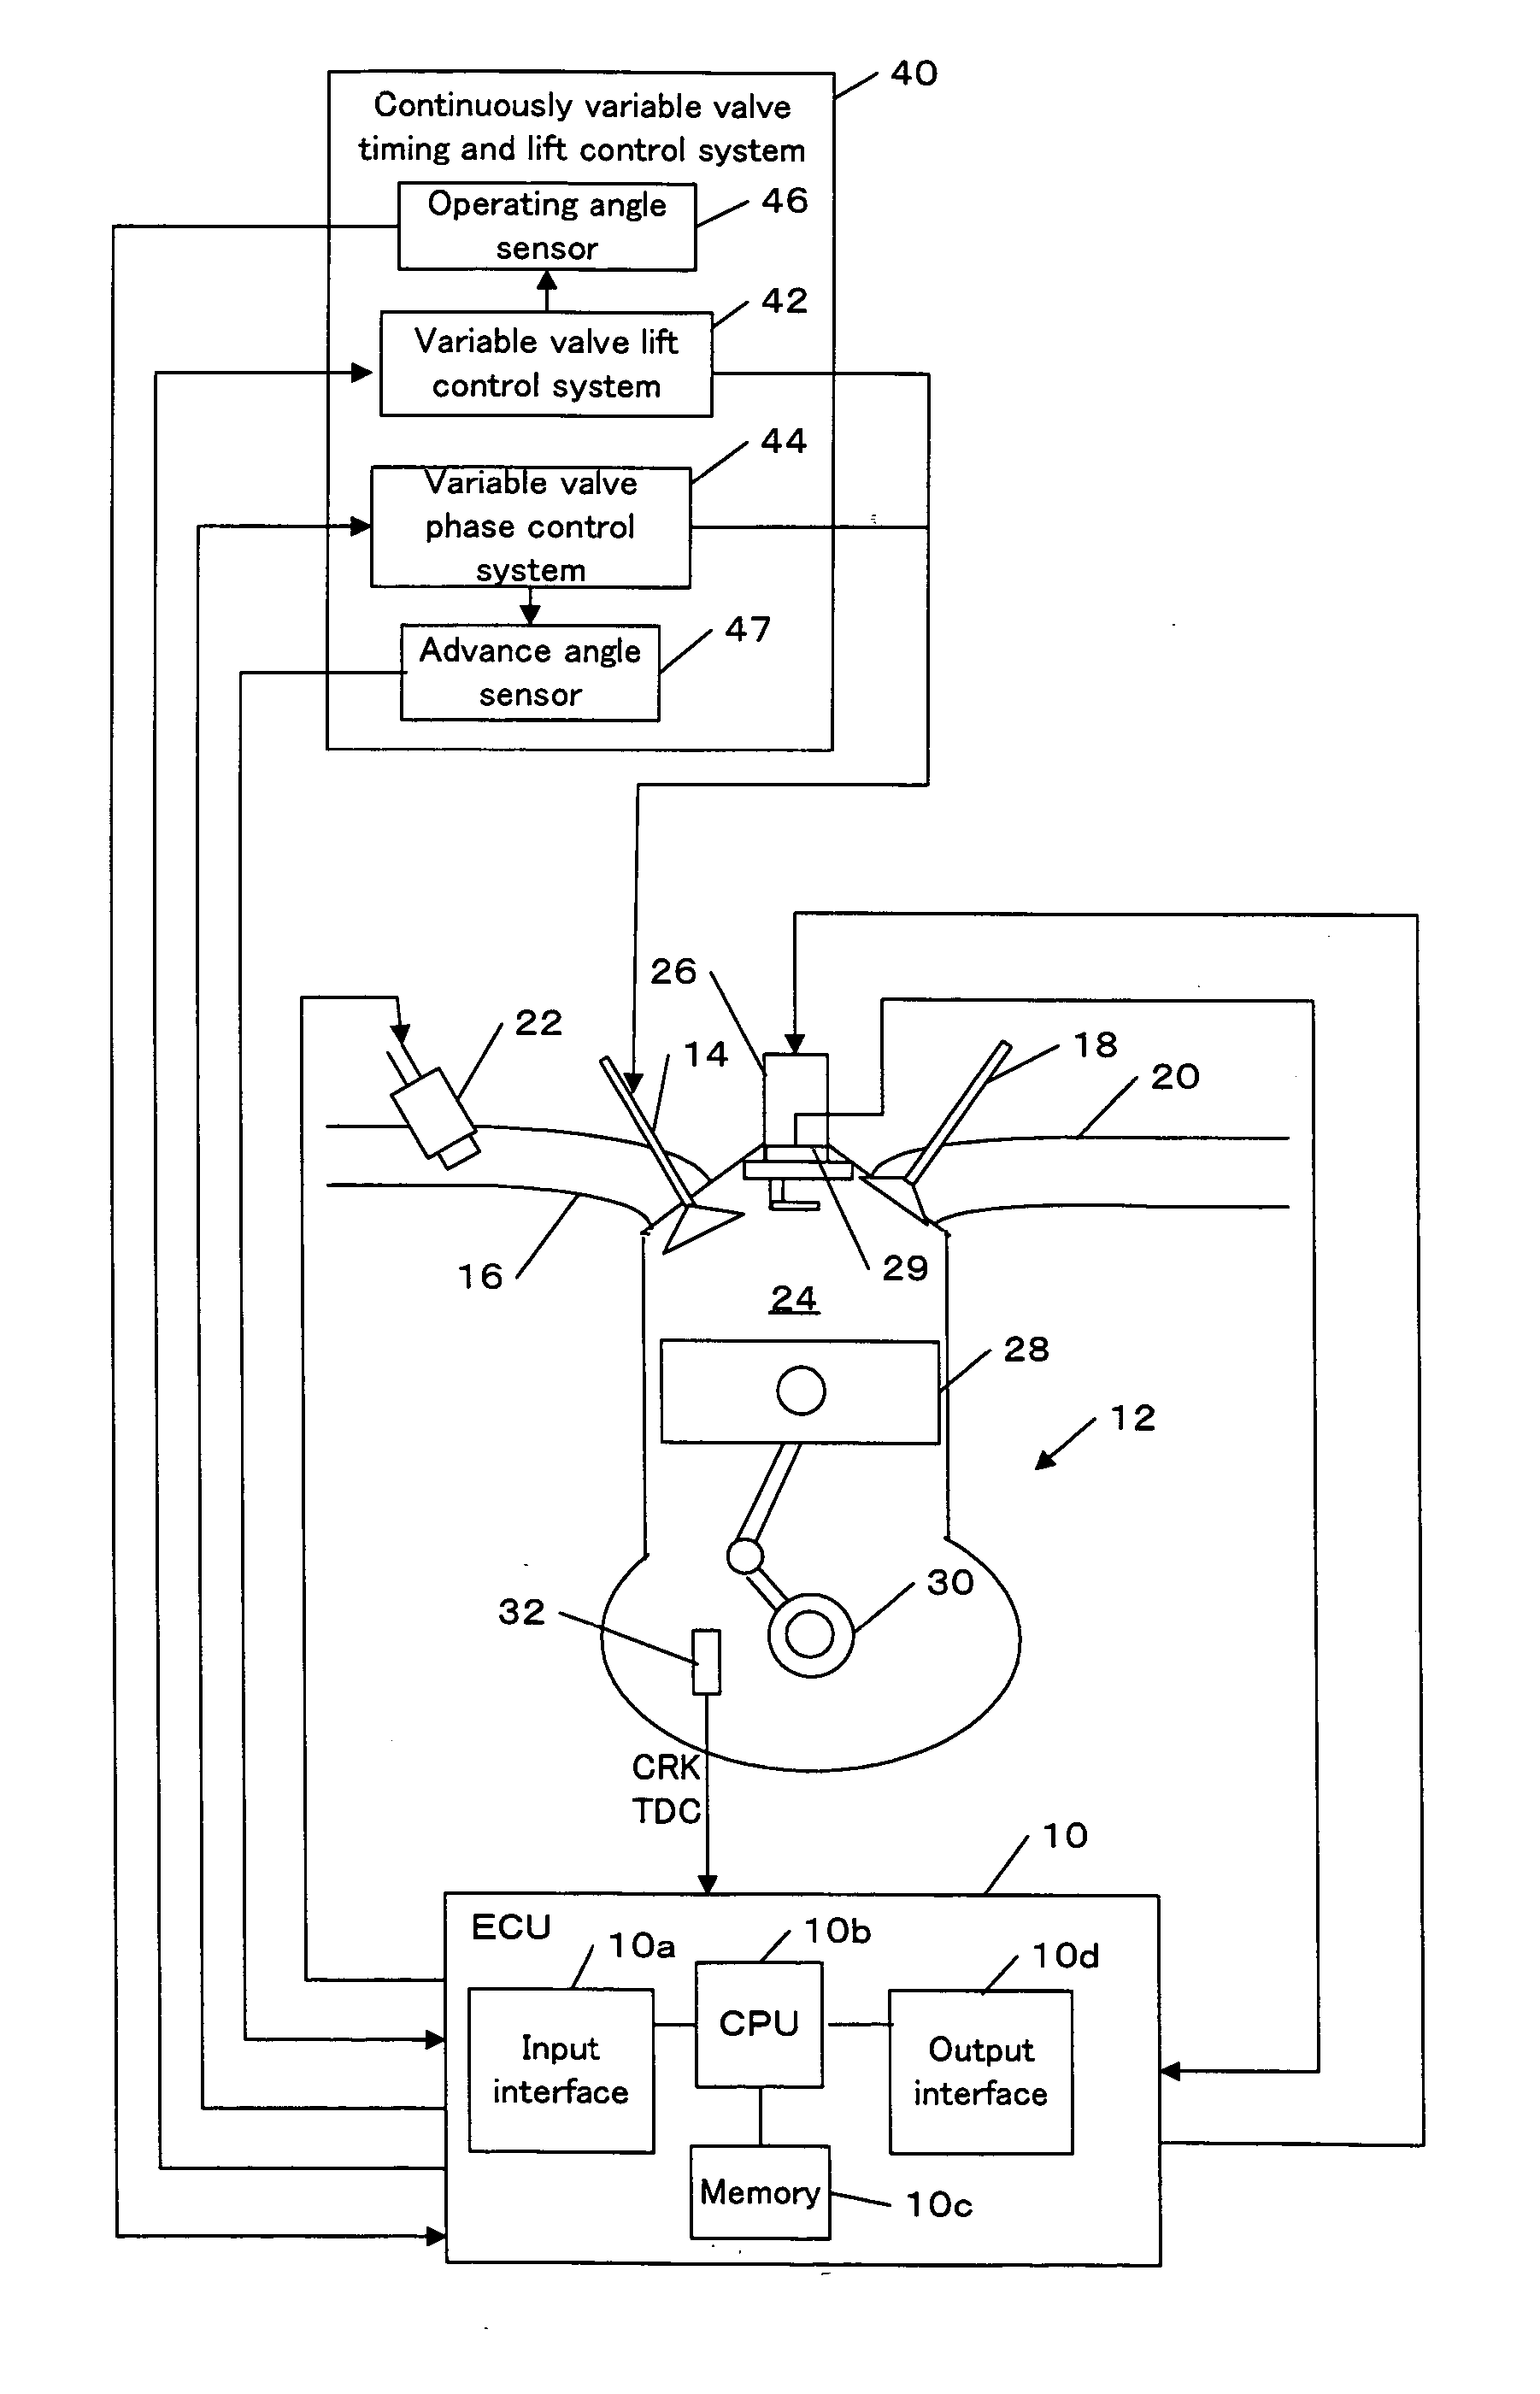 Failure detection apparatus for variable valve timing and lift control system of internal combustion engine